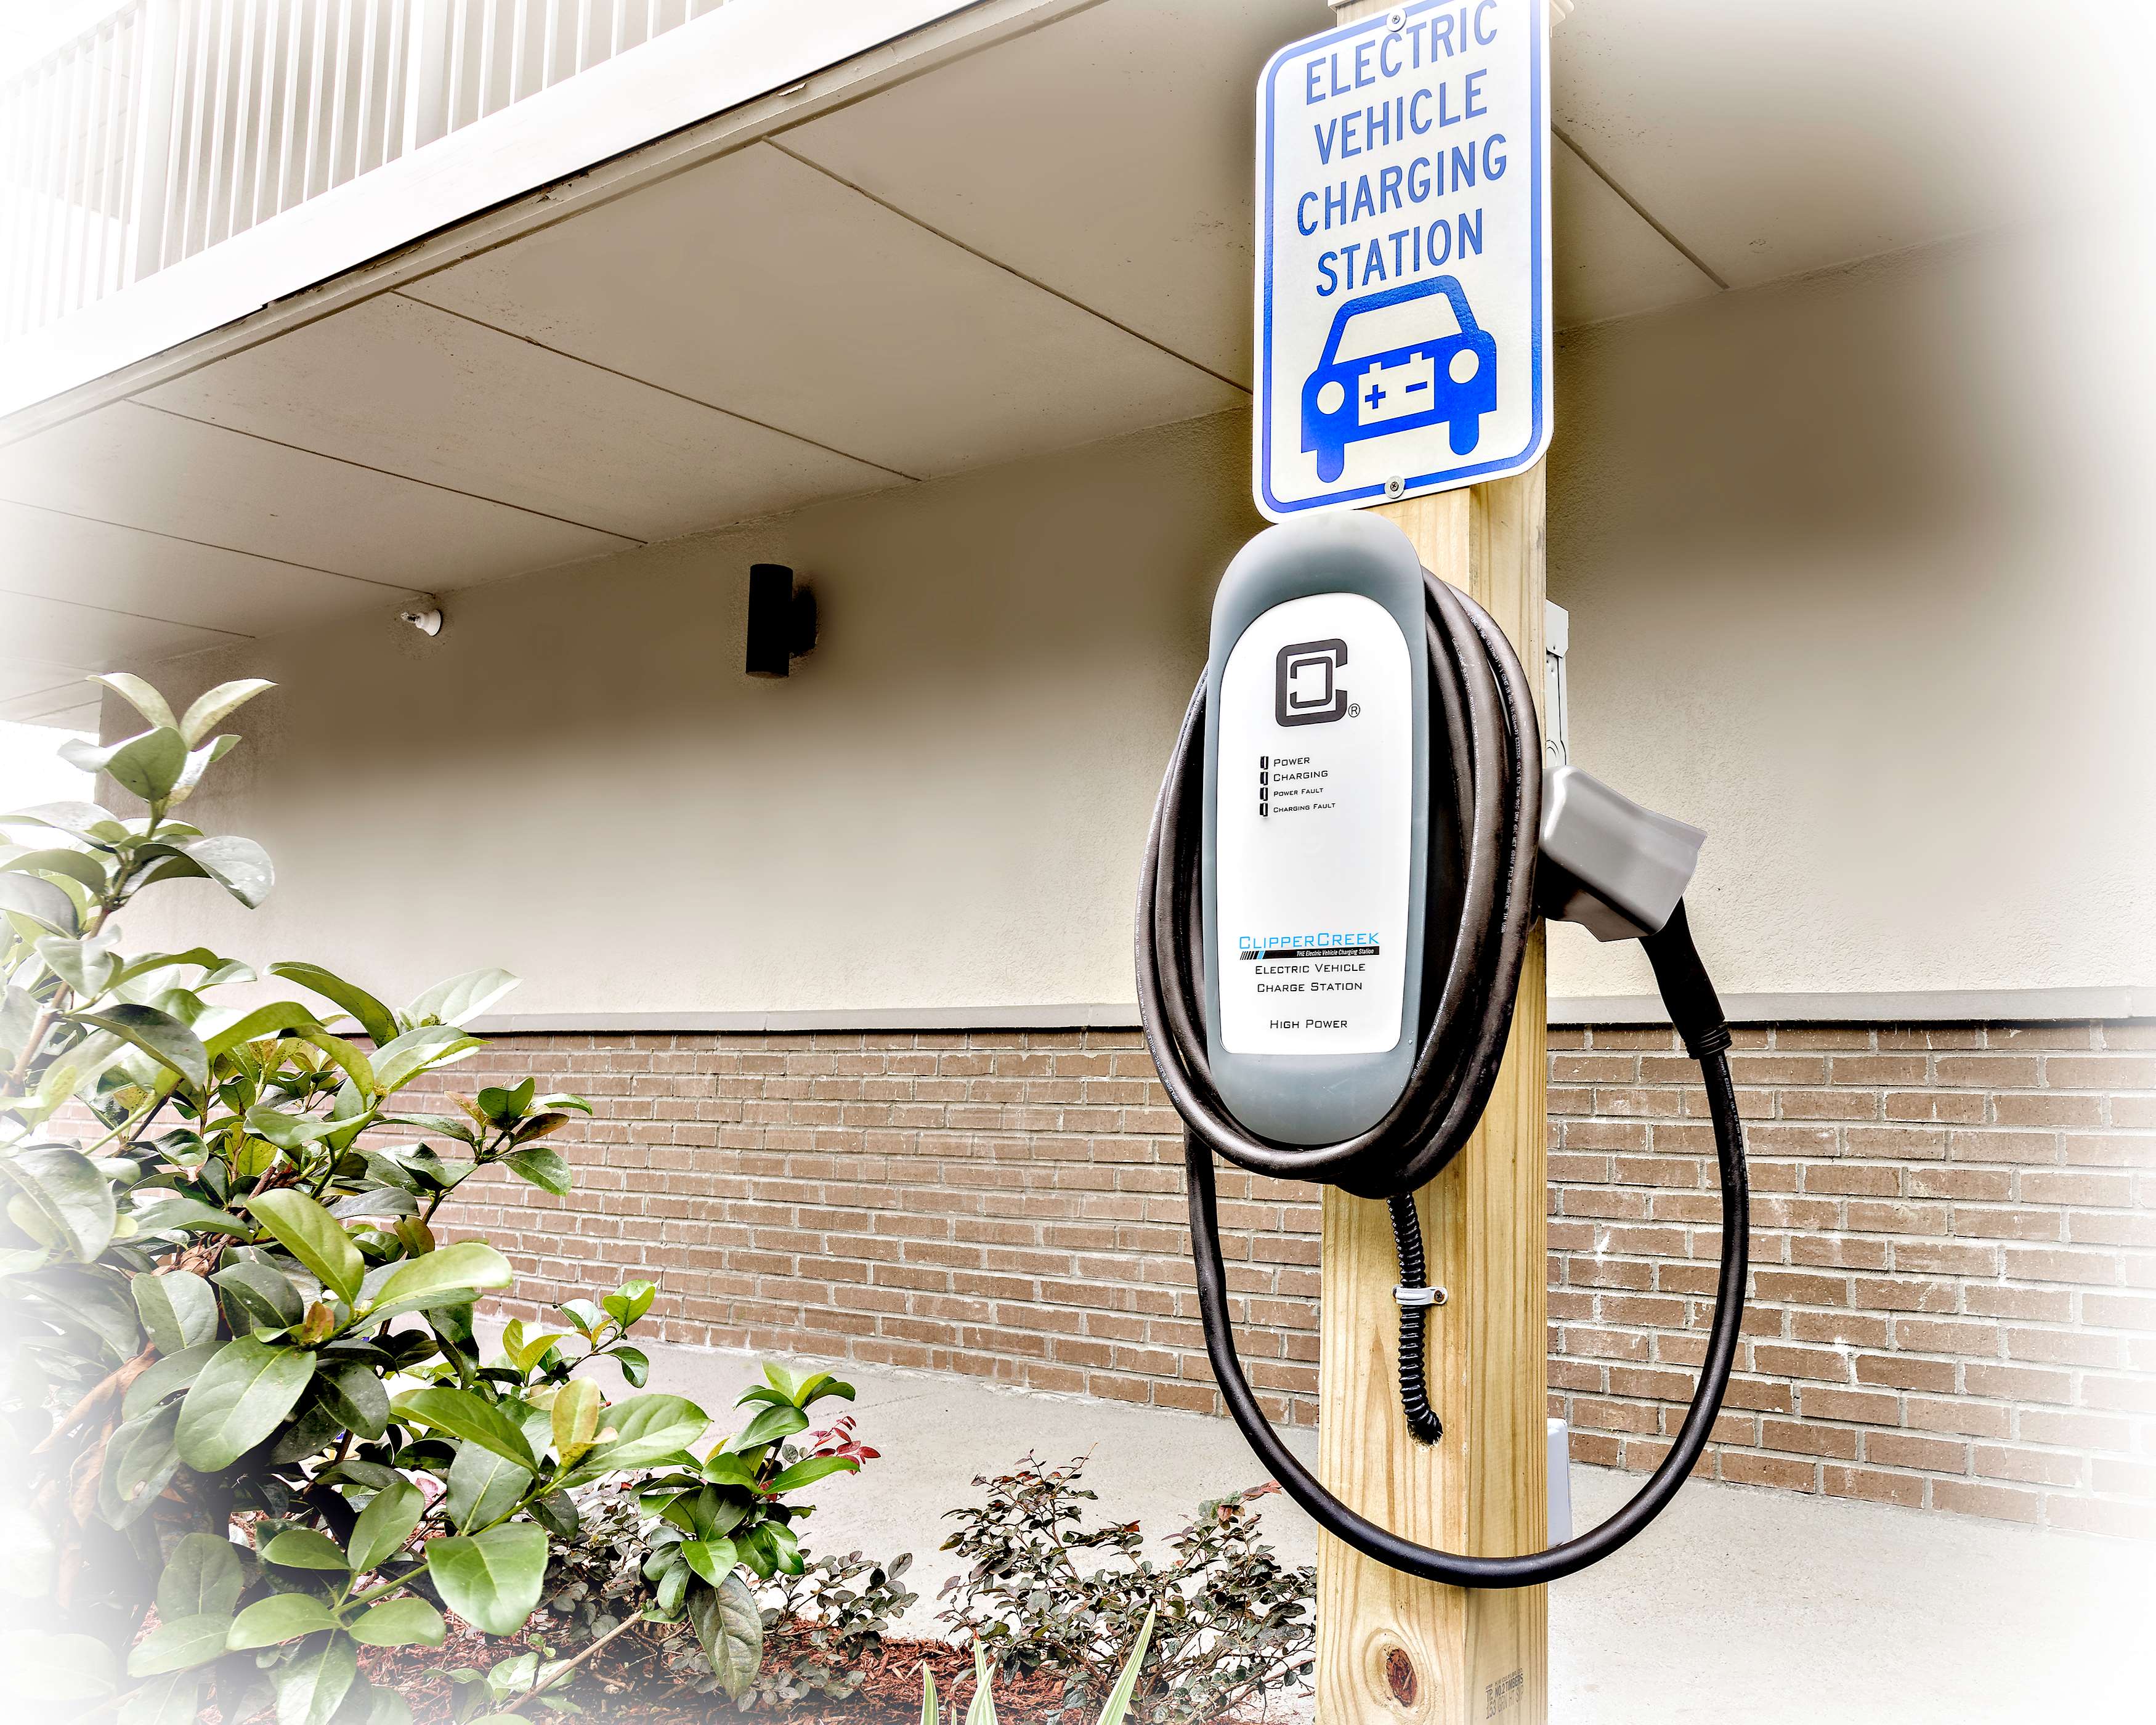 Electric Car Charger